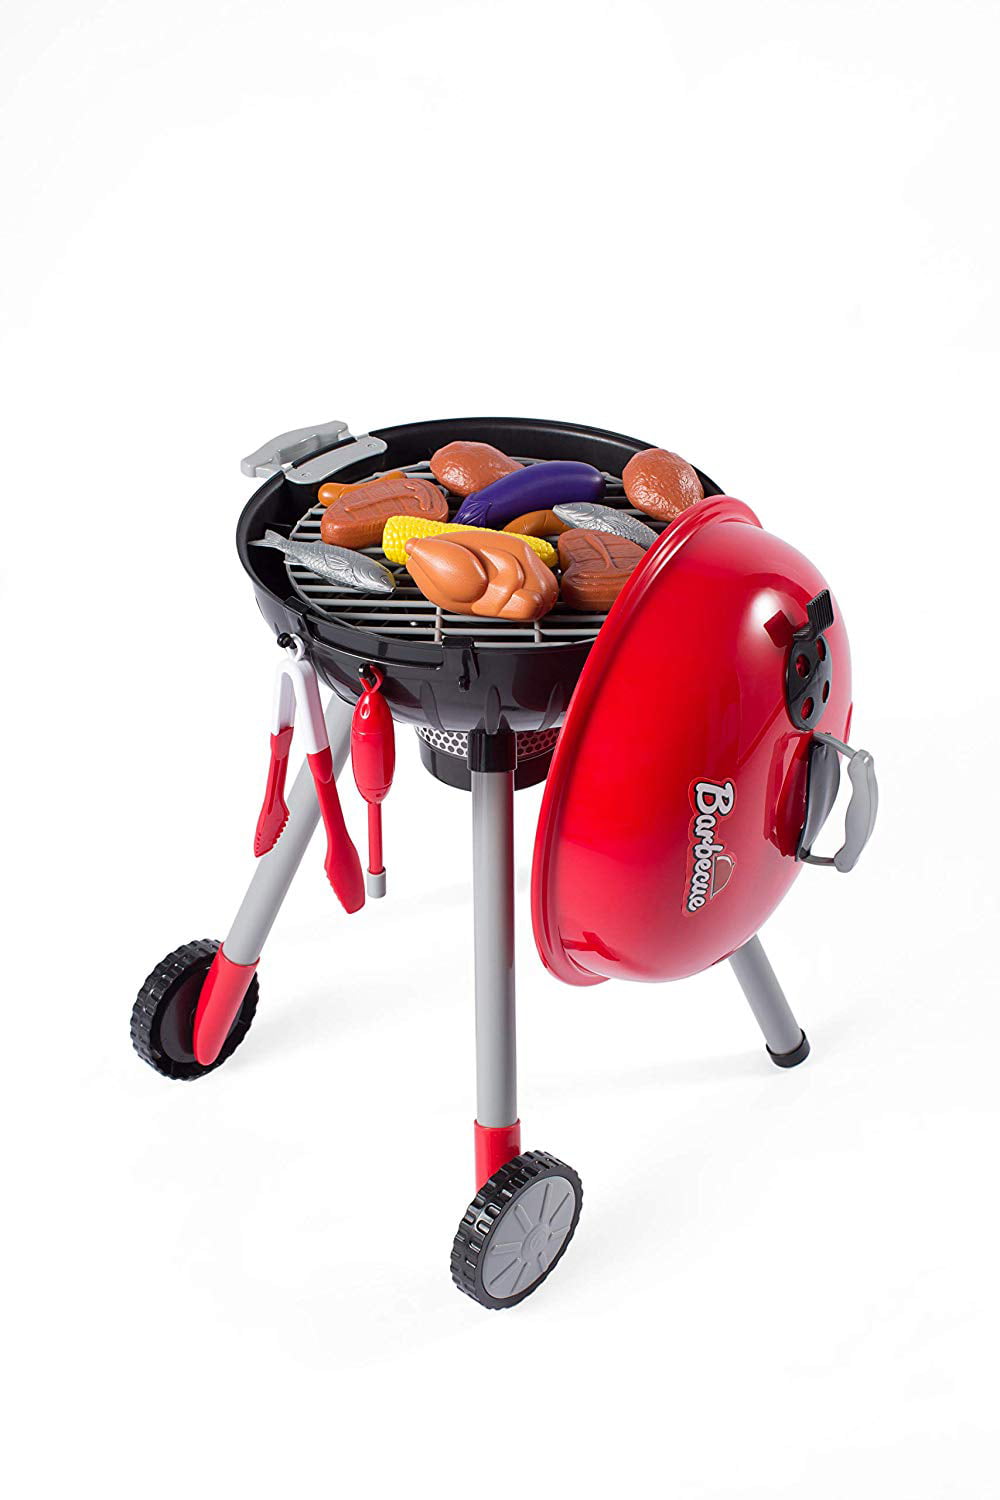 Nbd This 8 Piece Backyard Barbeque Get Out N Grill Toy Barbeque Grill Set Is Great To Have A Realistic Playtime Fun Adventure For Kids And The Whole Family Walmart Com